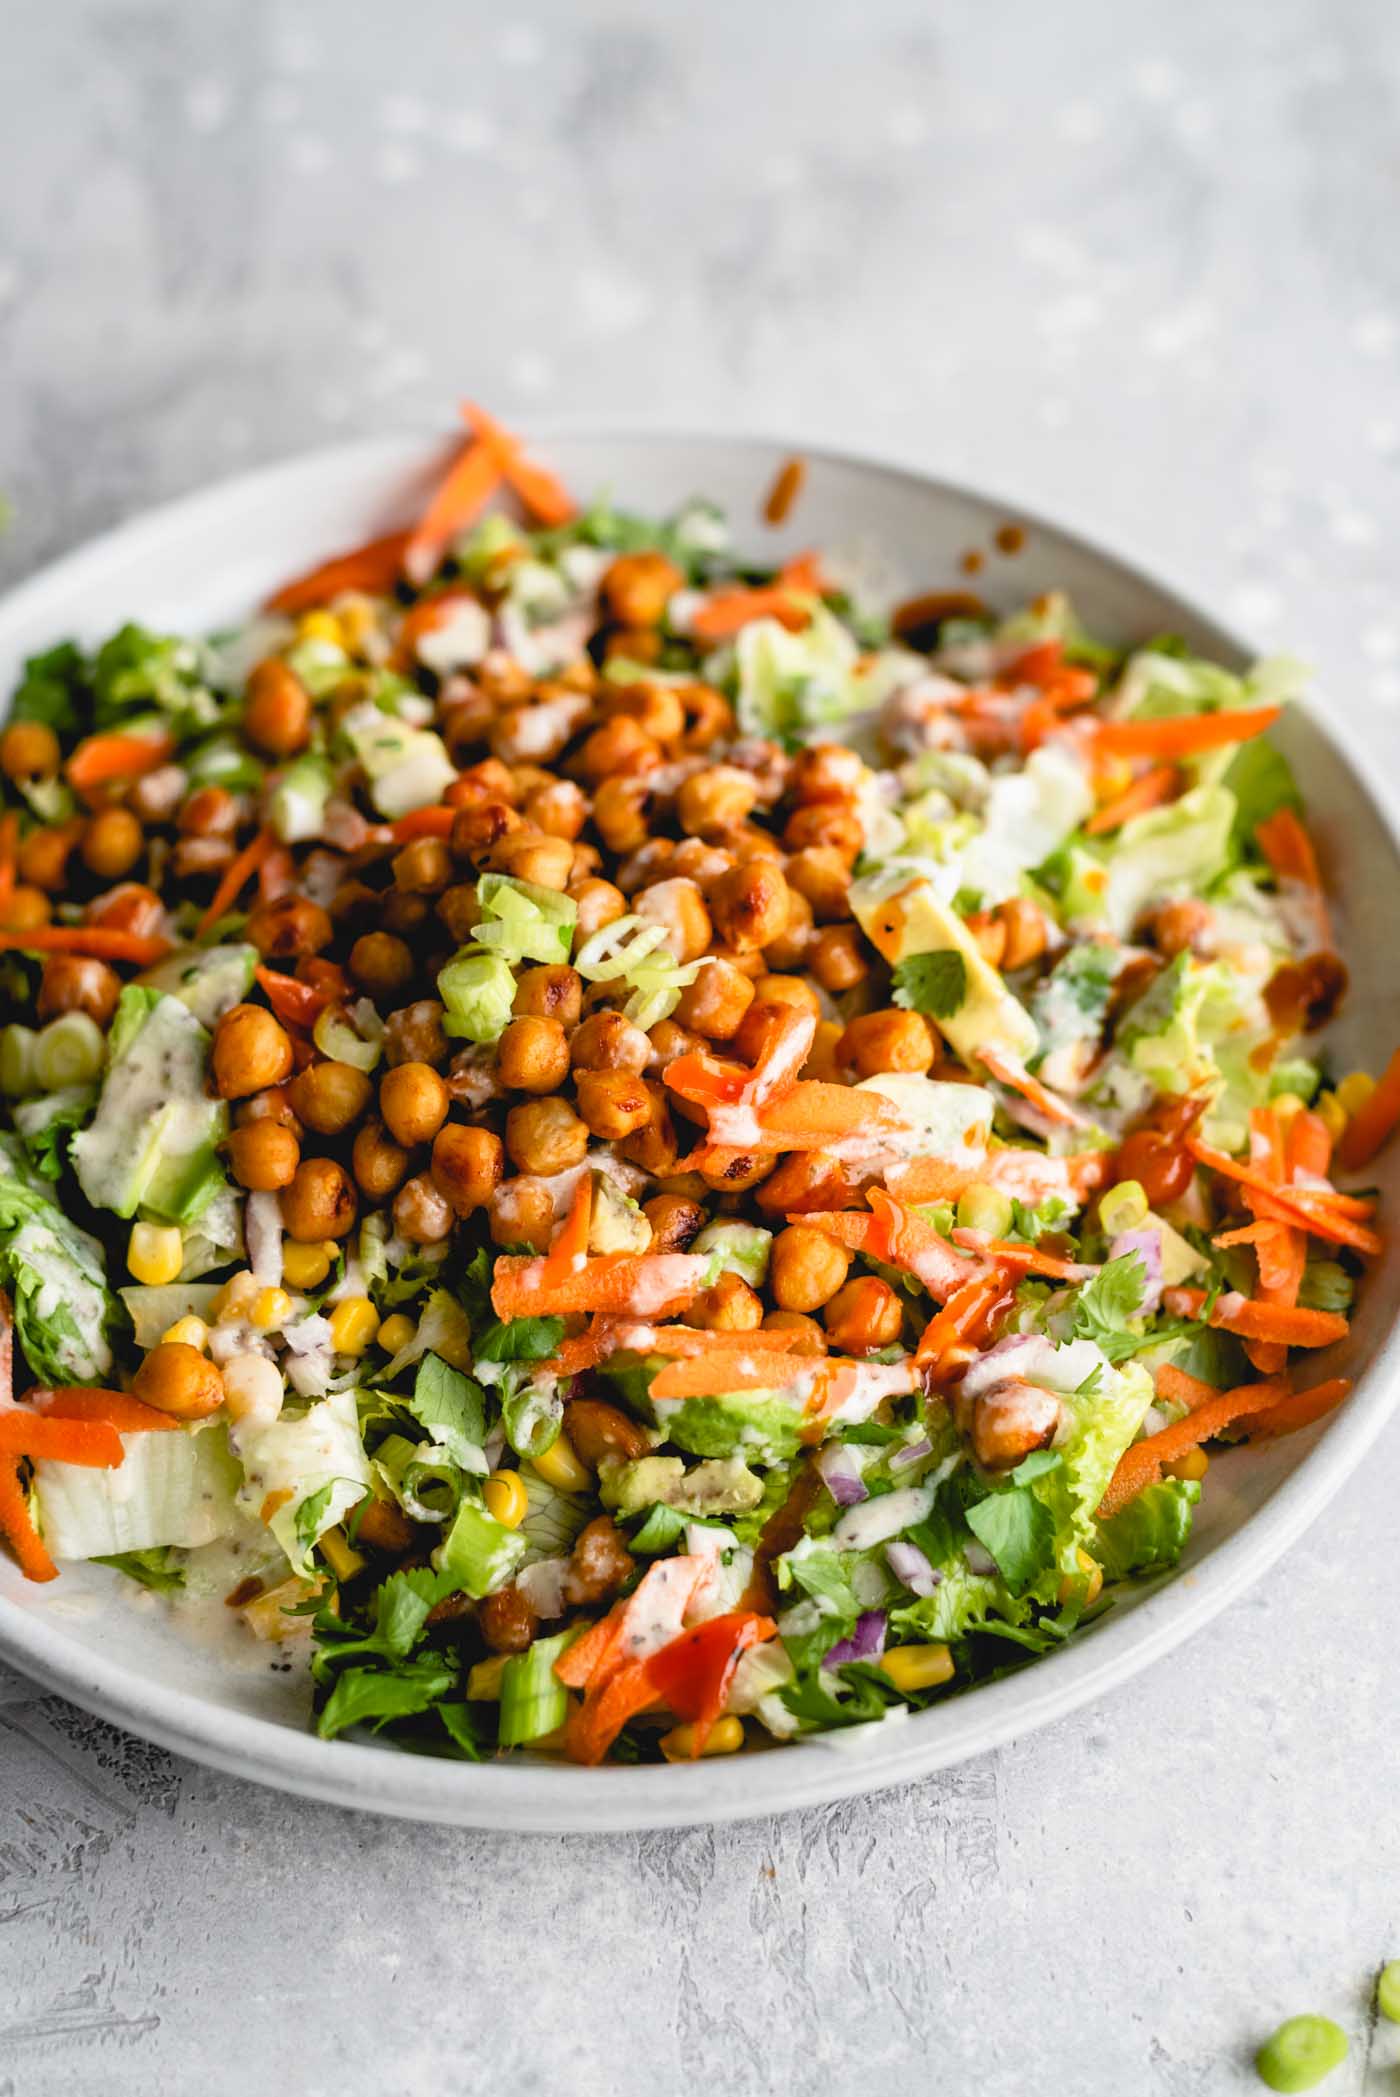 BBQ chickpea salad with lettuce, carrot, avocado, corn and tahini ranch dressing on a plate.